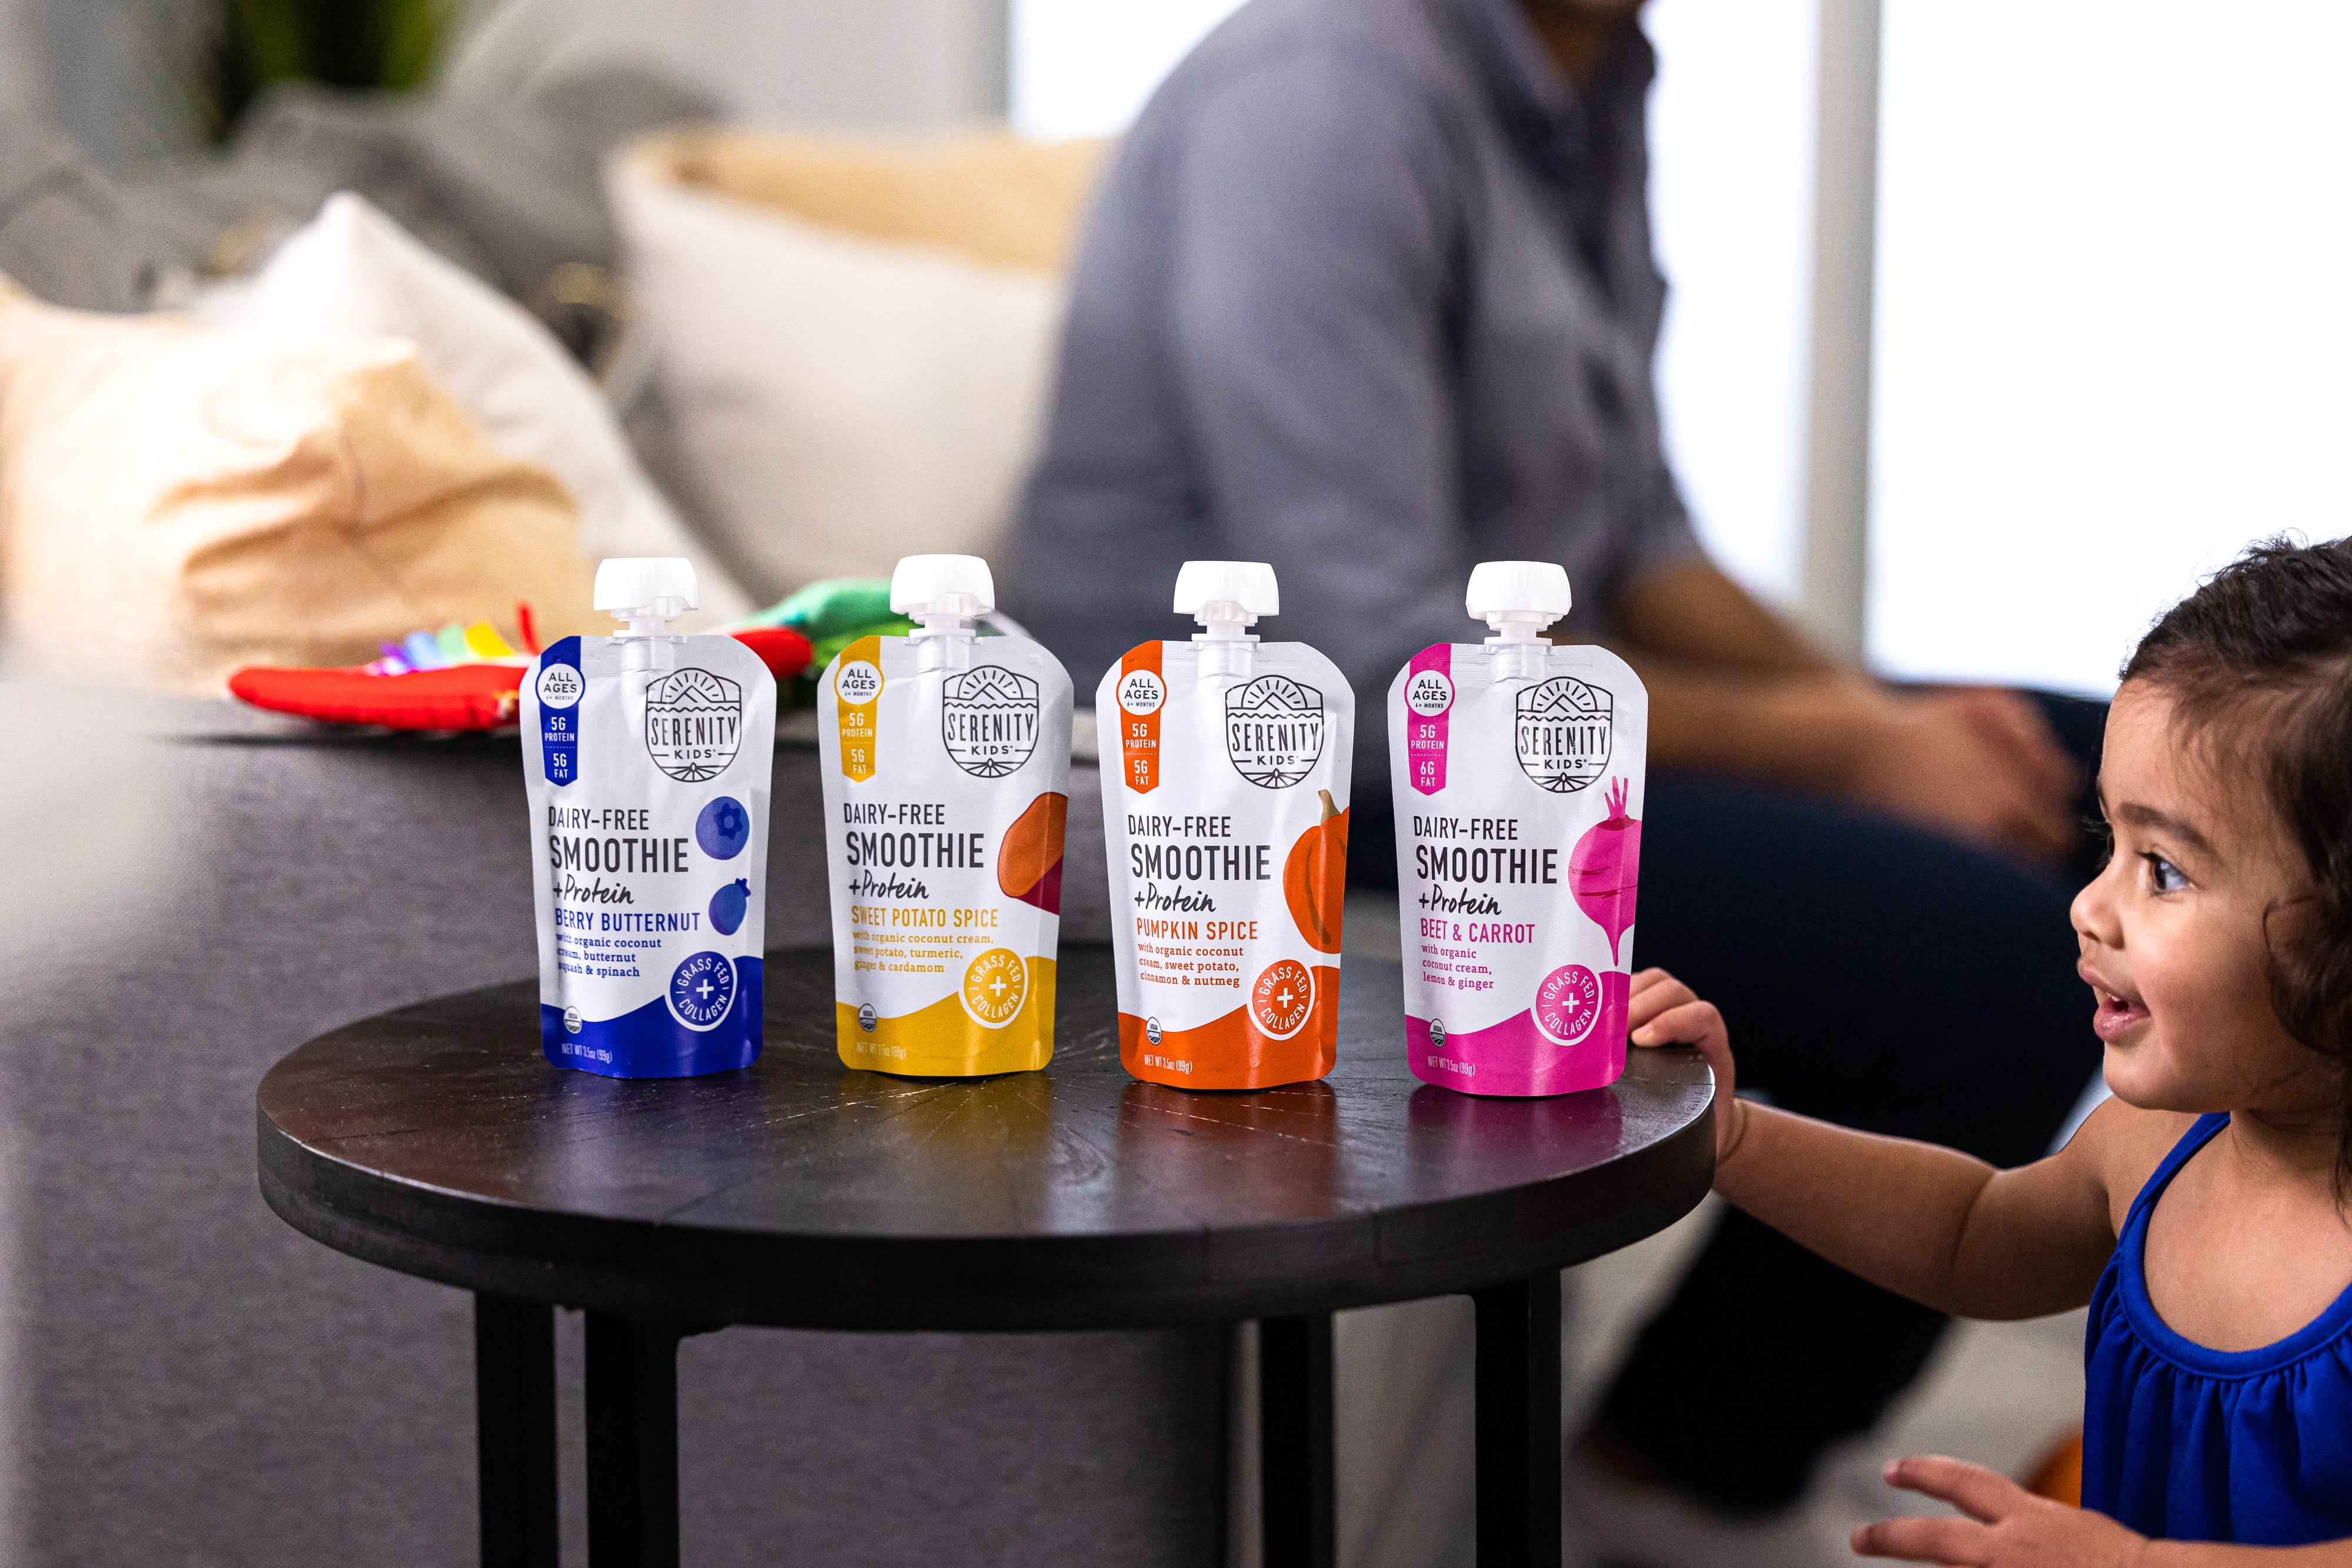 Dairy-Free Smoothies Variety Pack - Serenity Kids - Different Flavors of Smoothies